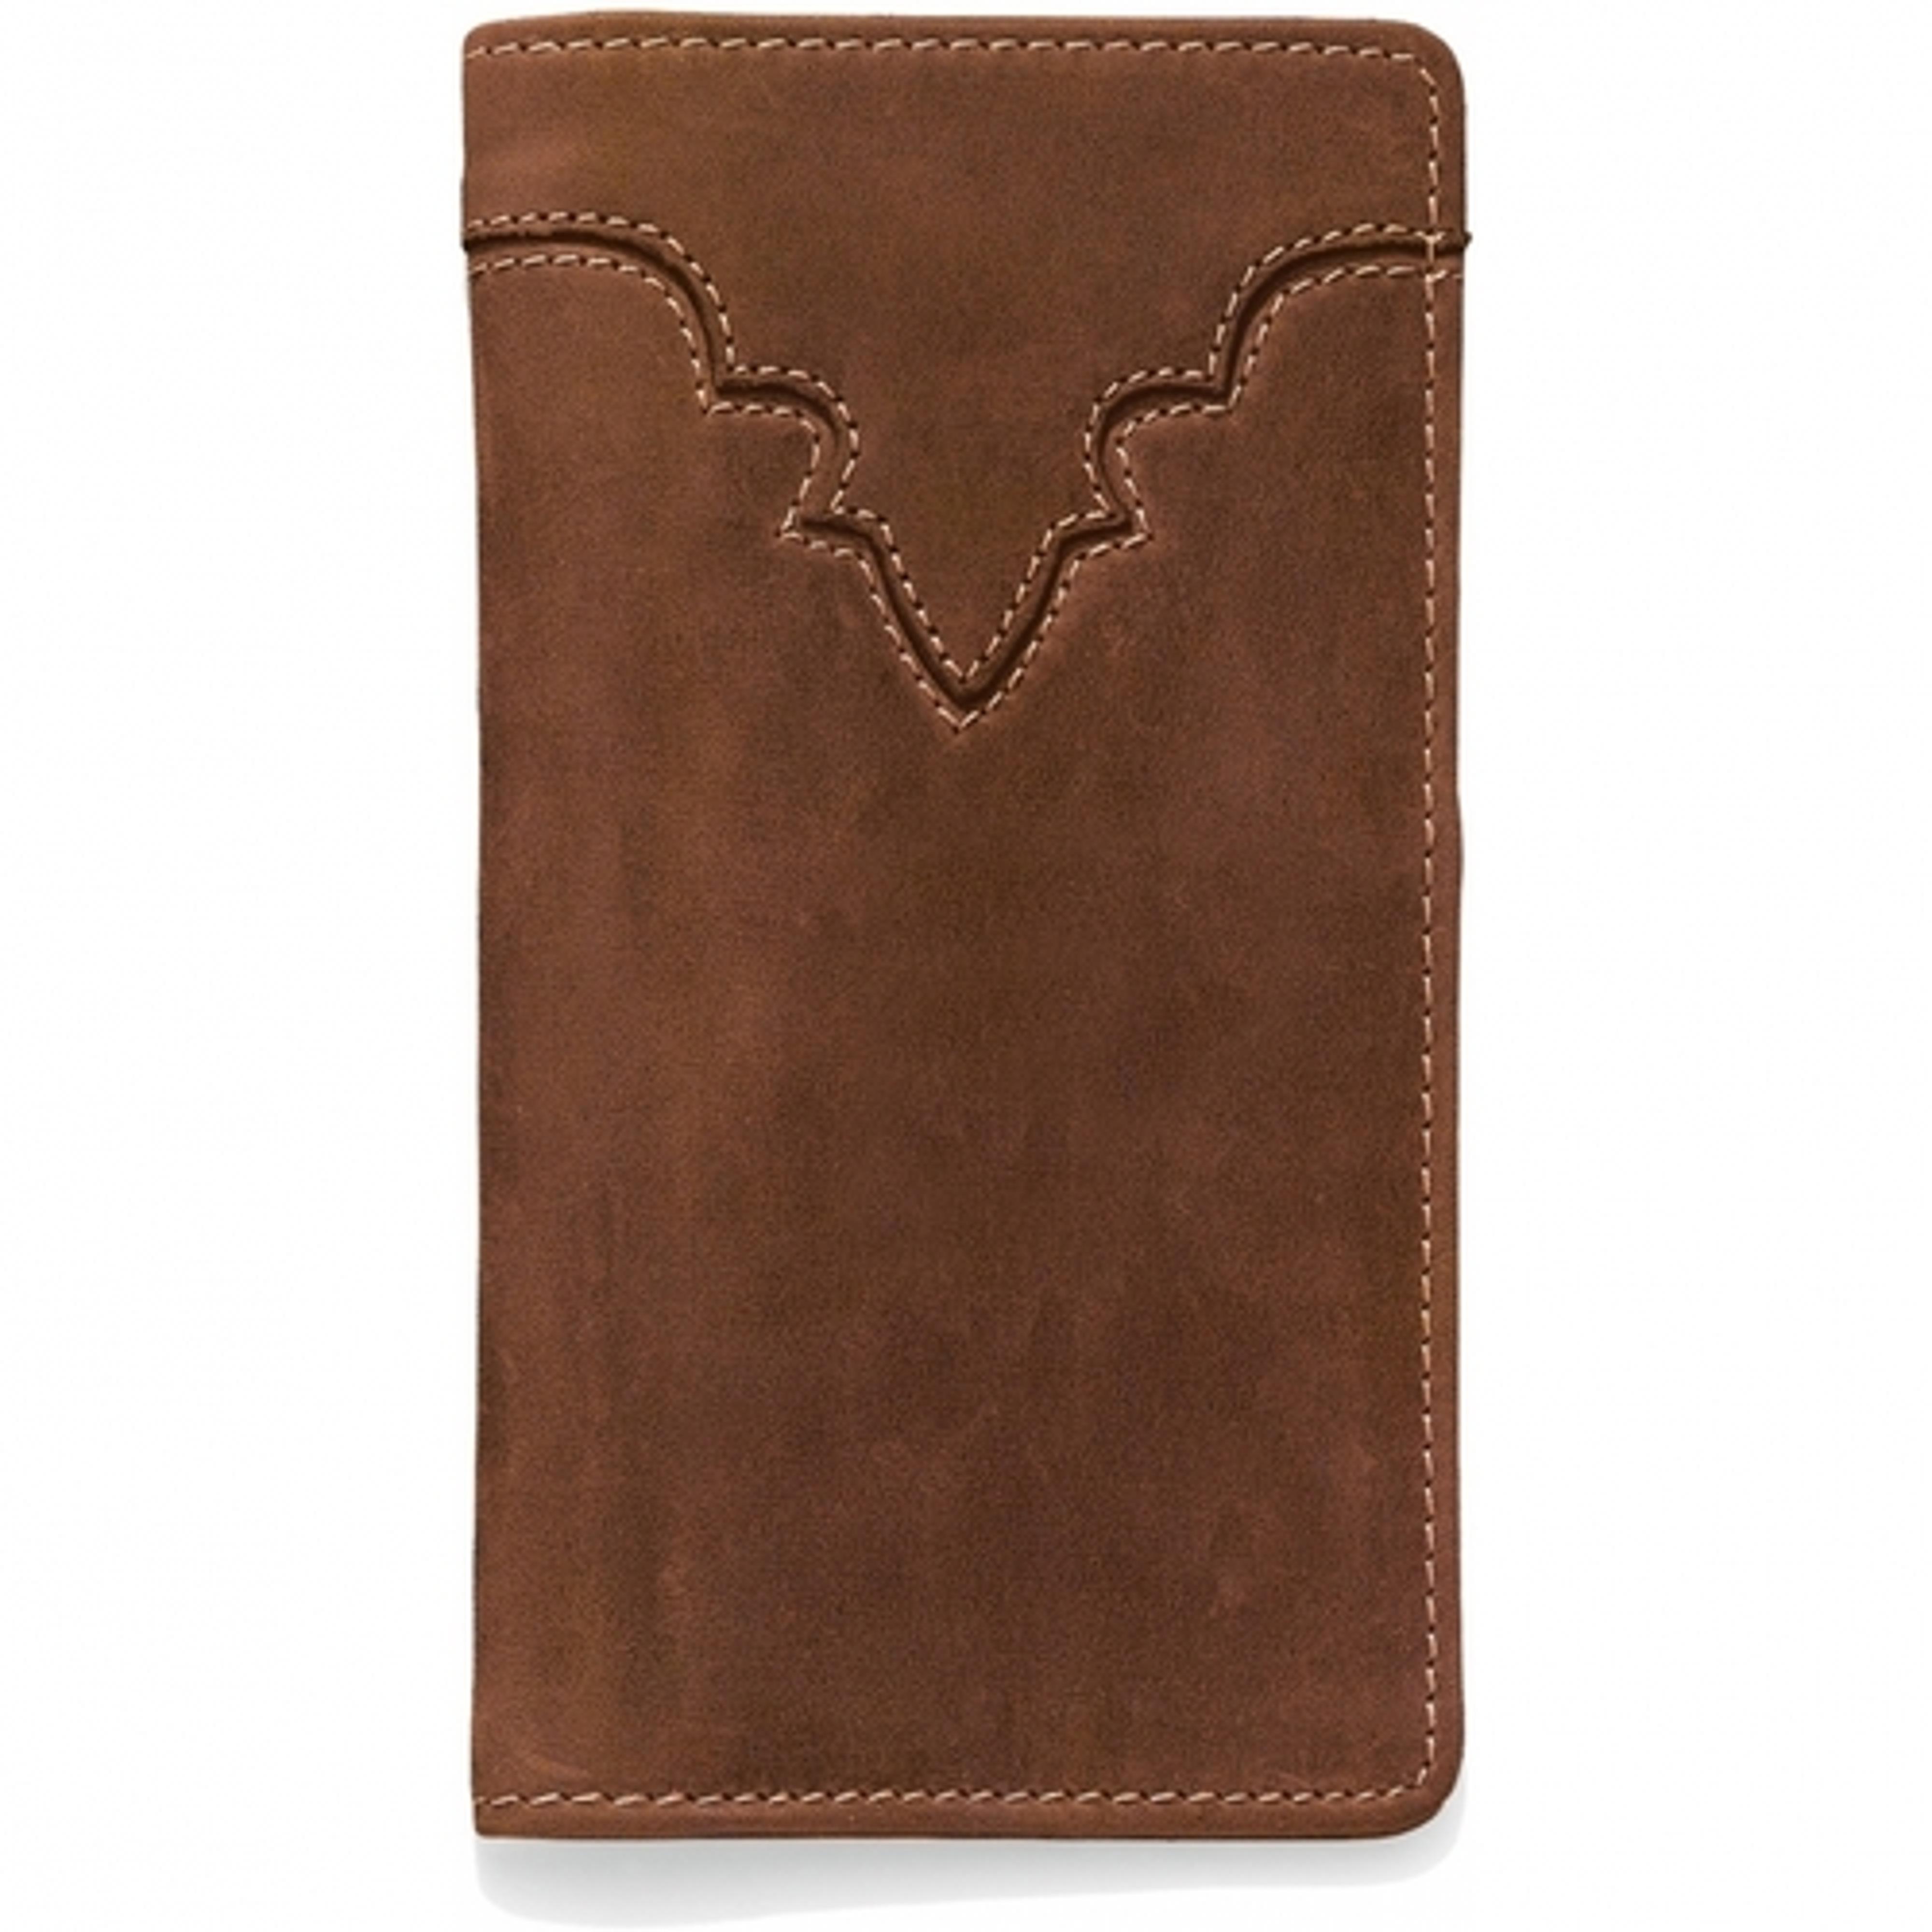  West Classic Checkbook Wallet